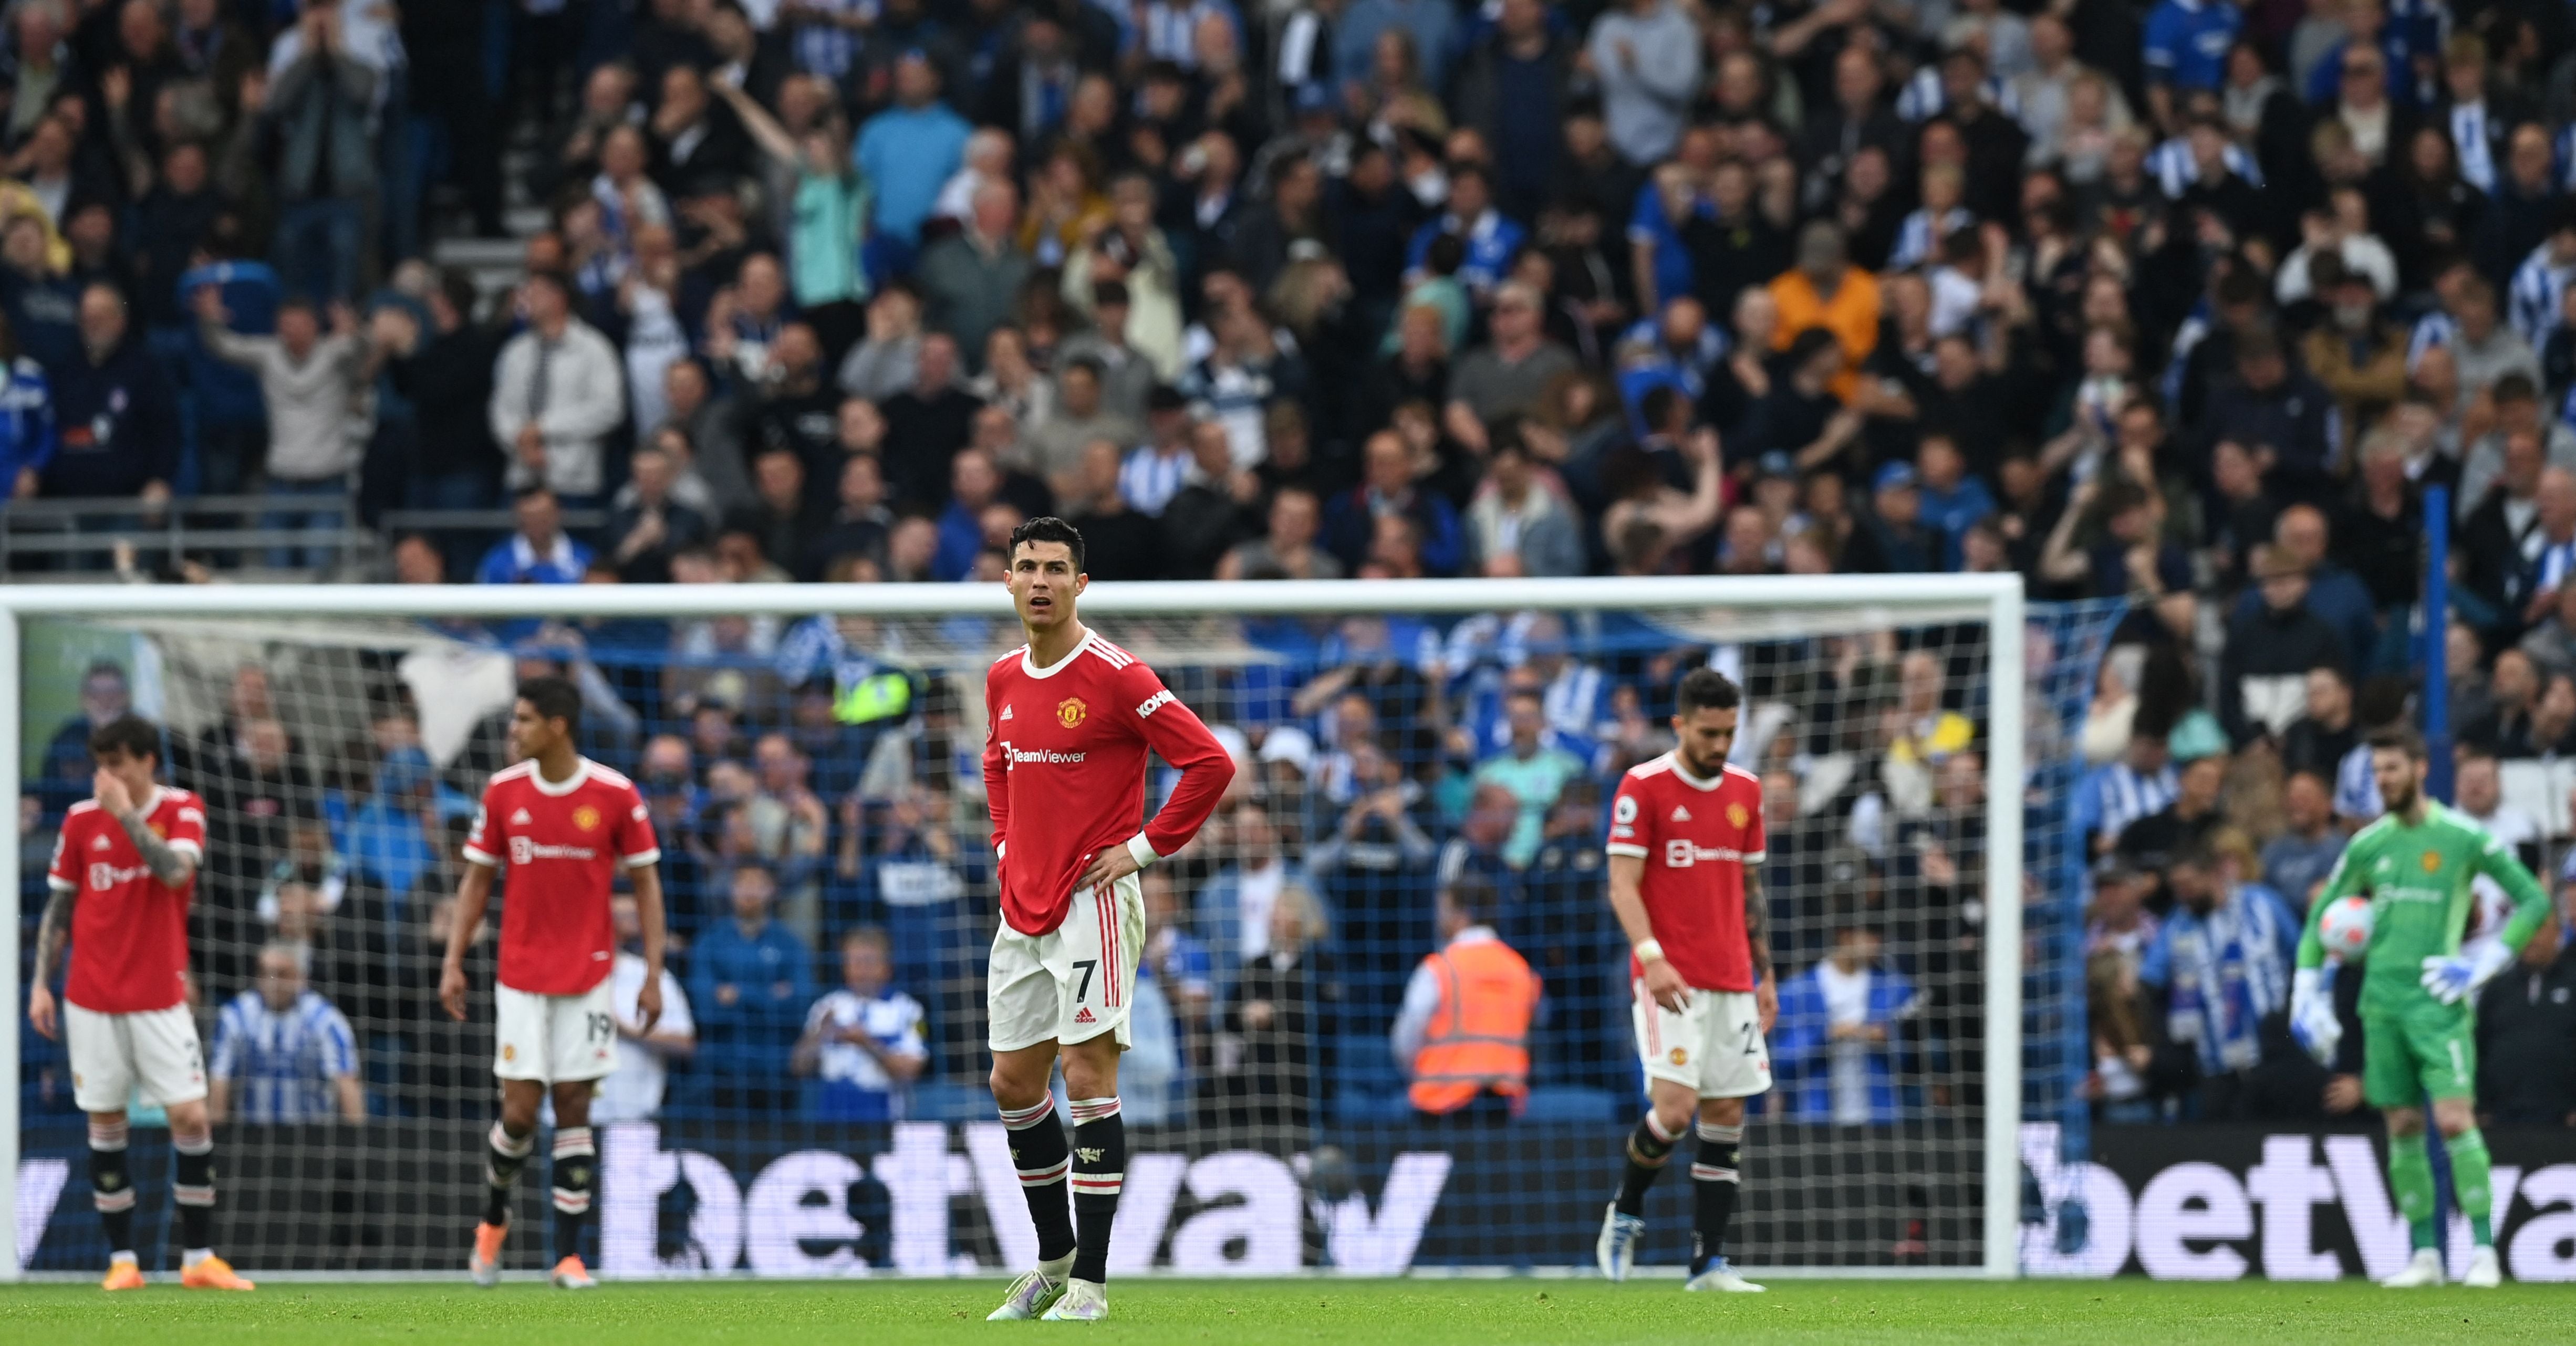 Manchester United were comfortably beaten by Brighton